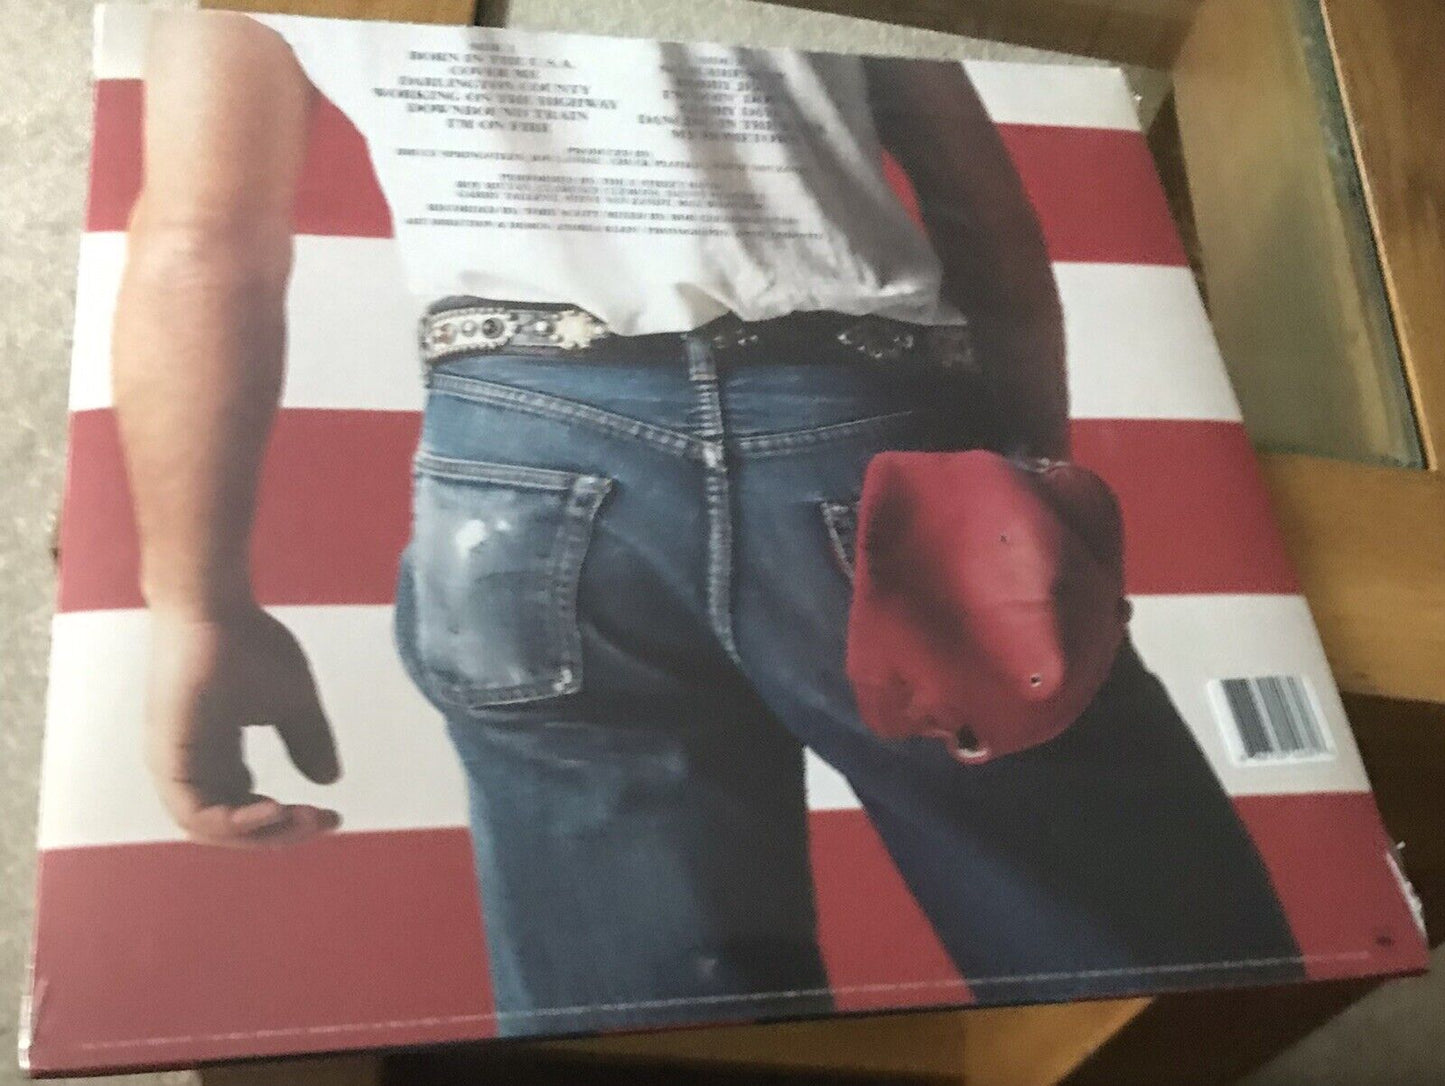 The back of 'Bruce Springsteen - Born in the USA' on vinyl